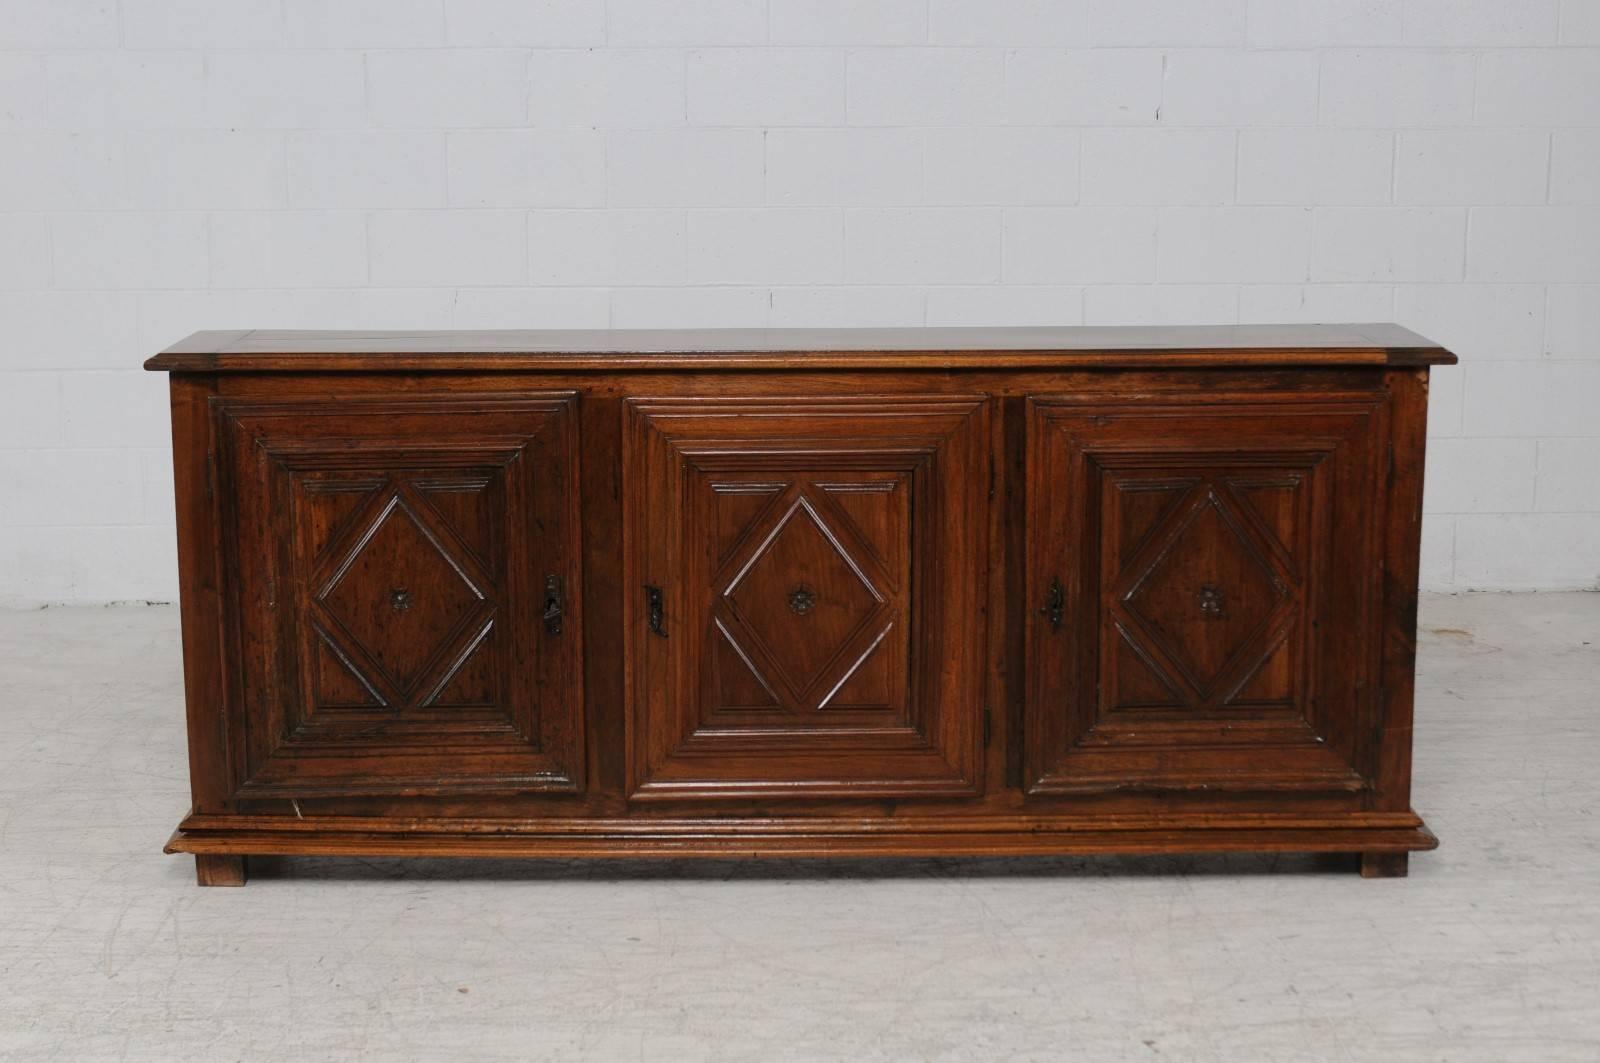 An Italian three-door chestnut enfilade from the early 19th century. This Italian long buffet features a rectangular top with molded edges sitting above three beautifully carved doors. Each door is made of molded frames surrounding a vertical